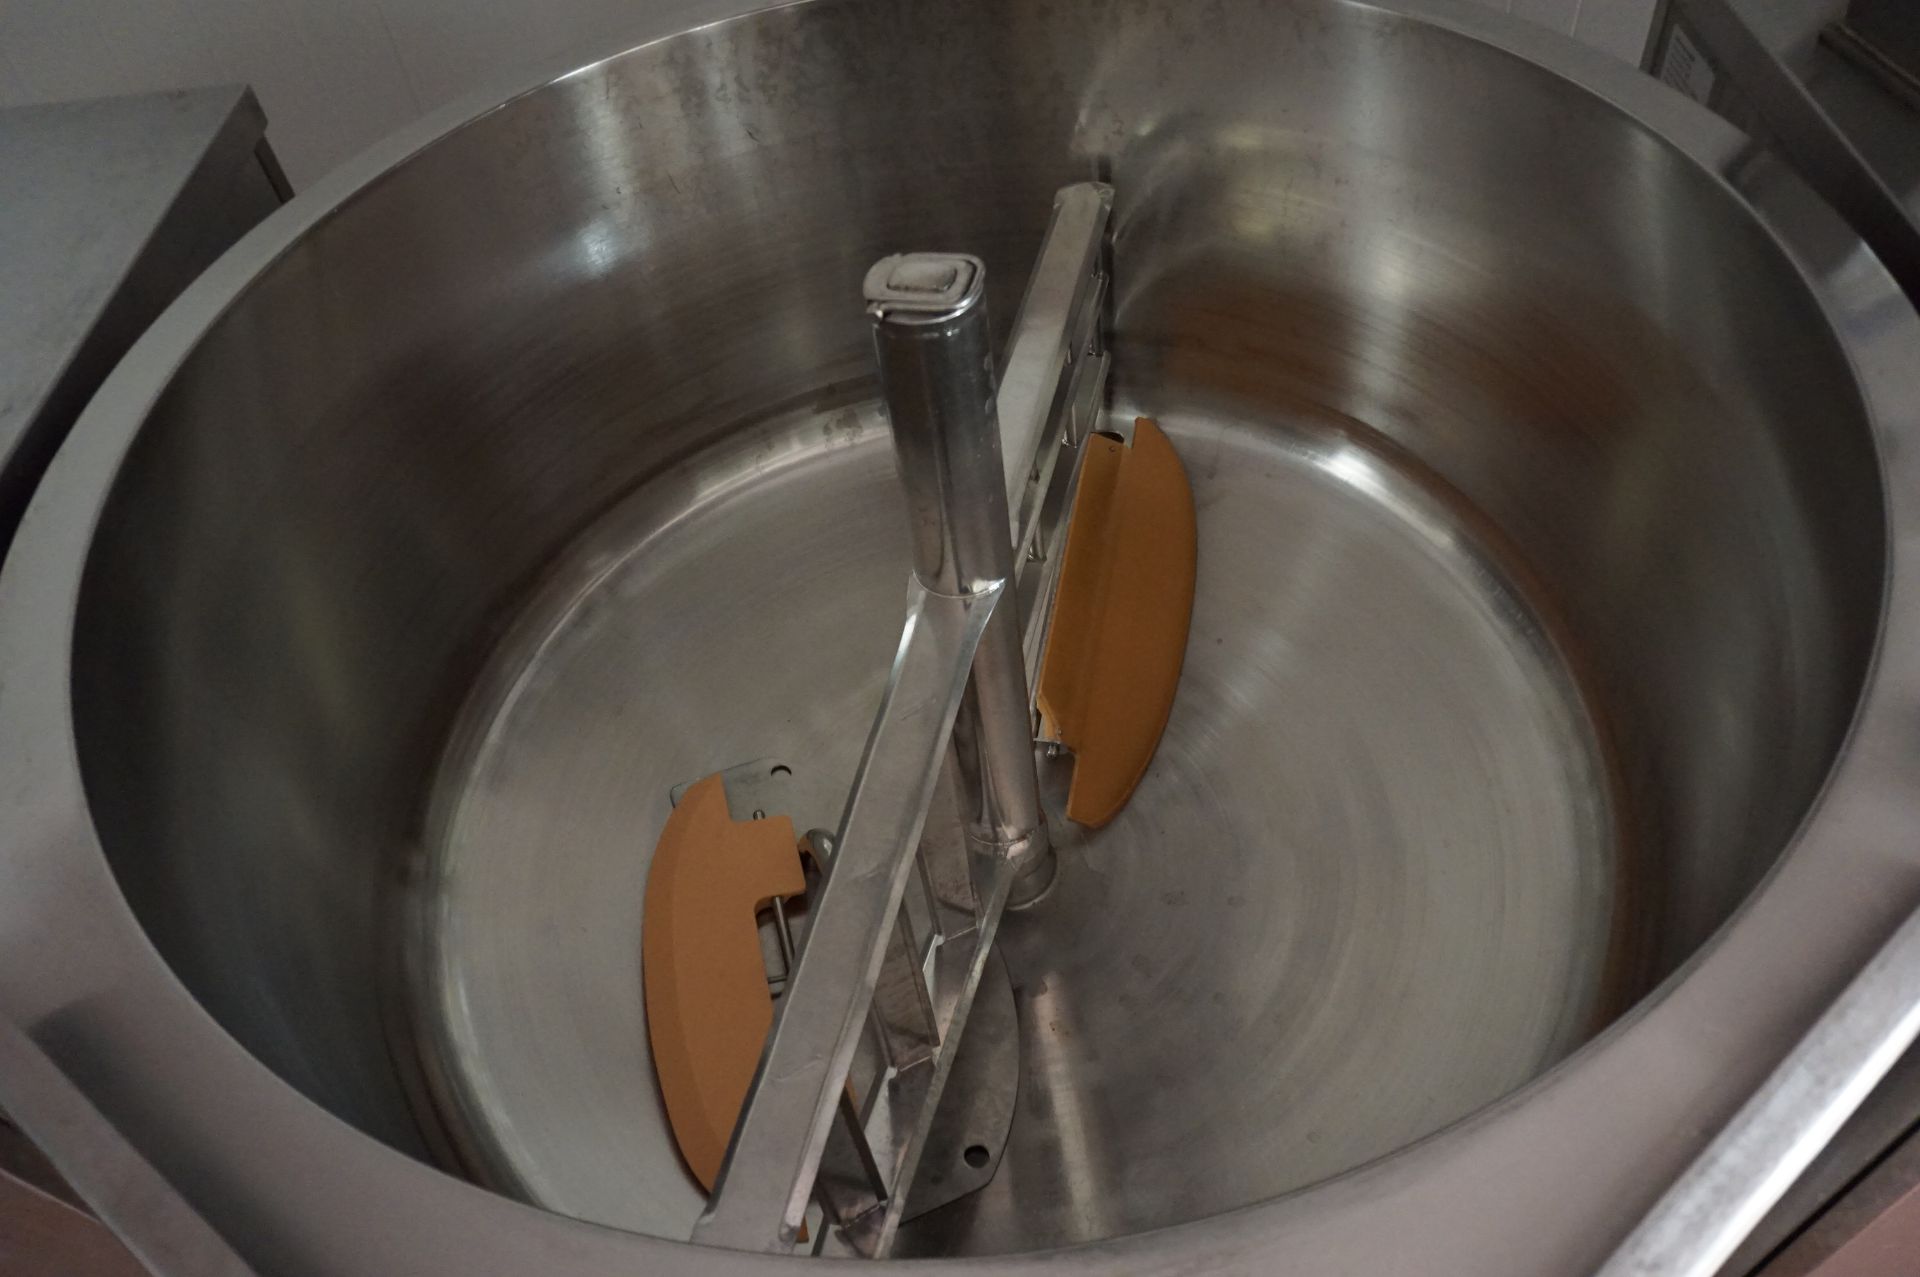 Kettle, Model: Multimix, 300L cook/chill vat with tilting function, Serial No. 016293-6237 (2016) - Image 3 of 4